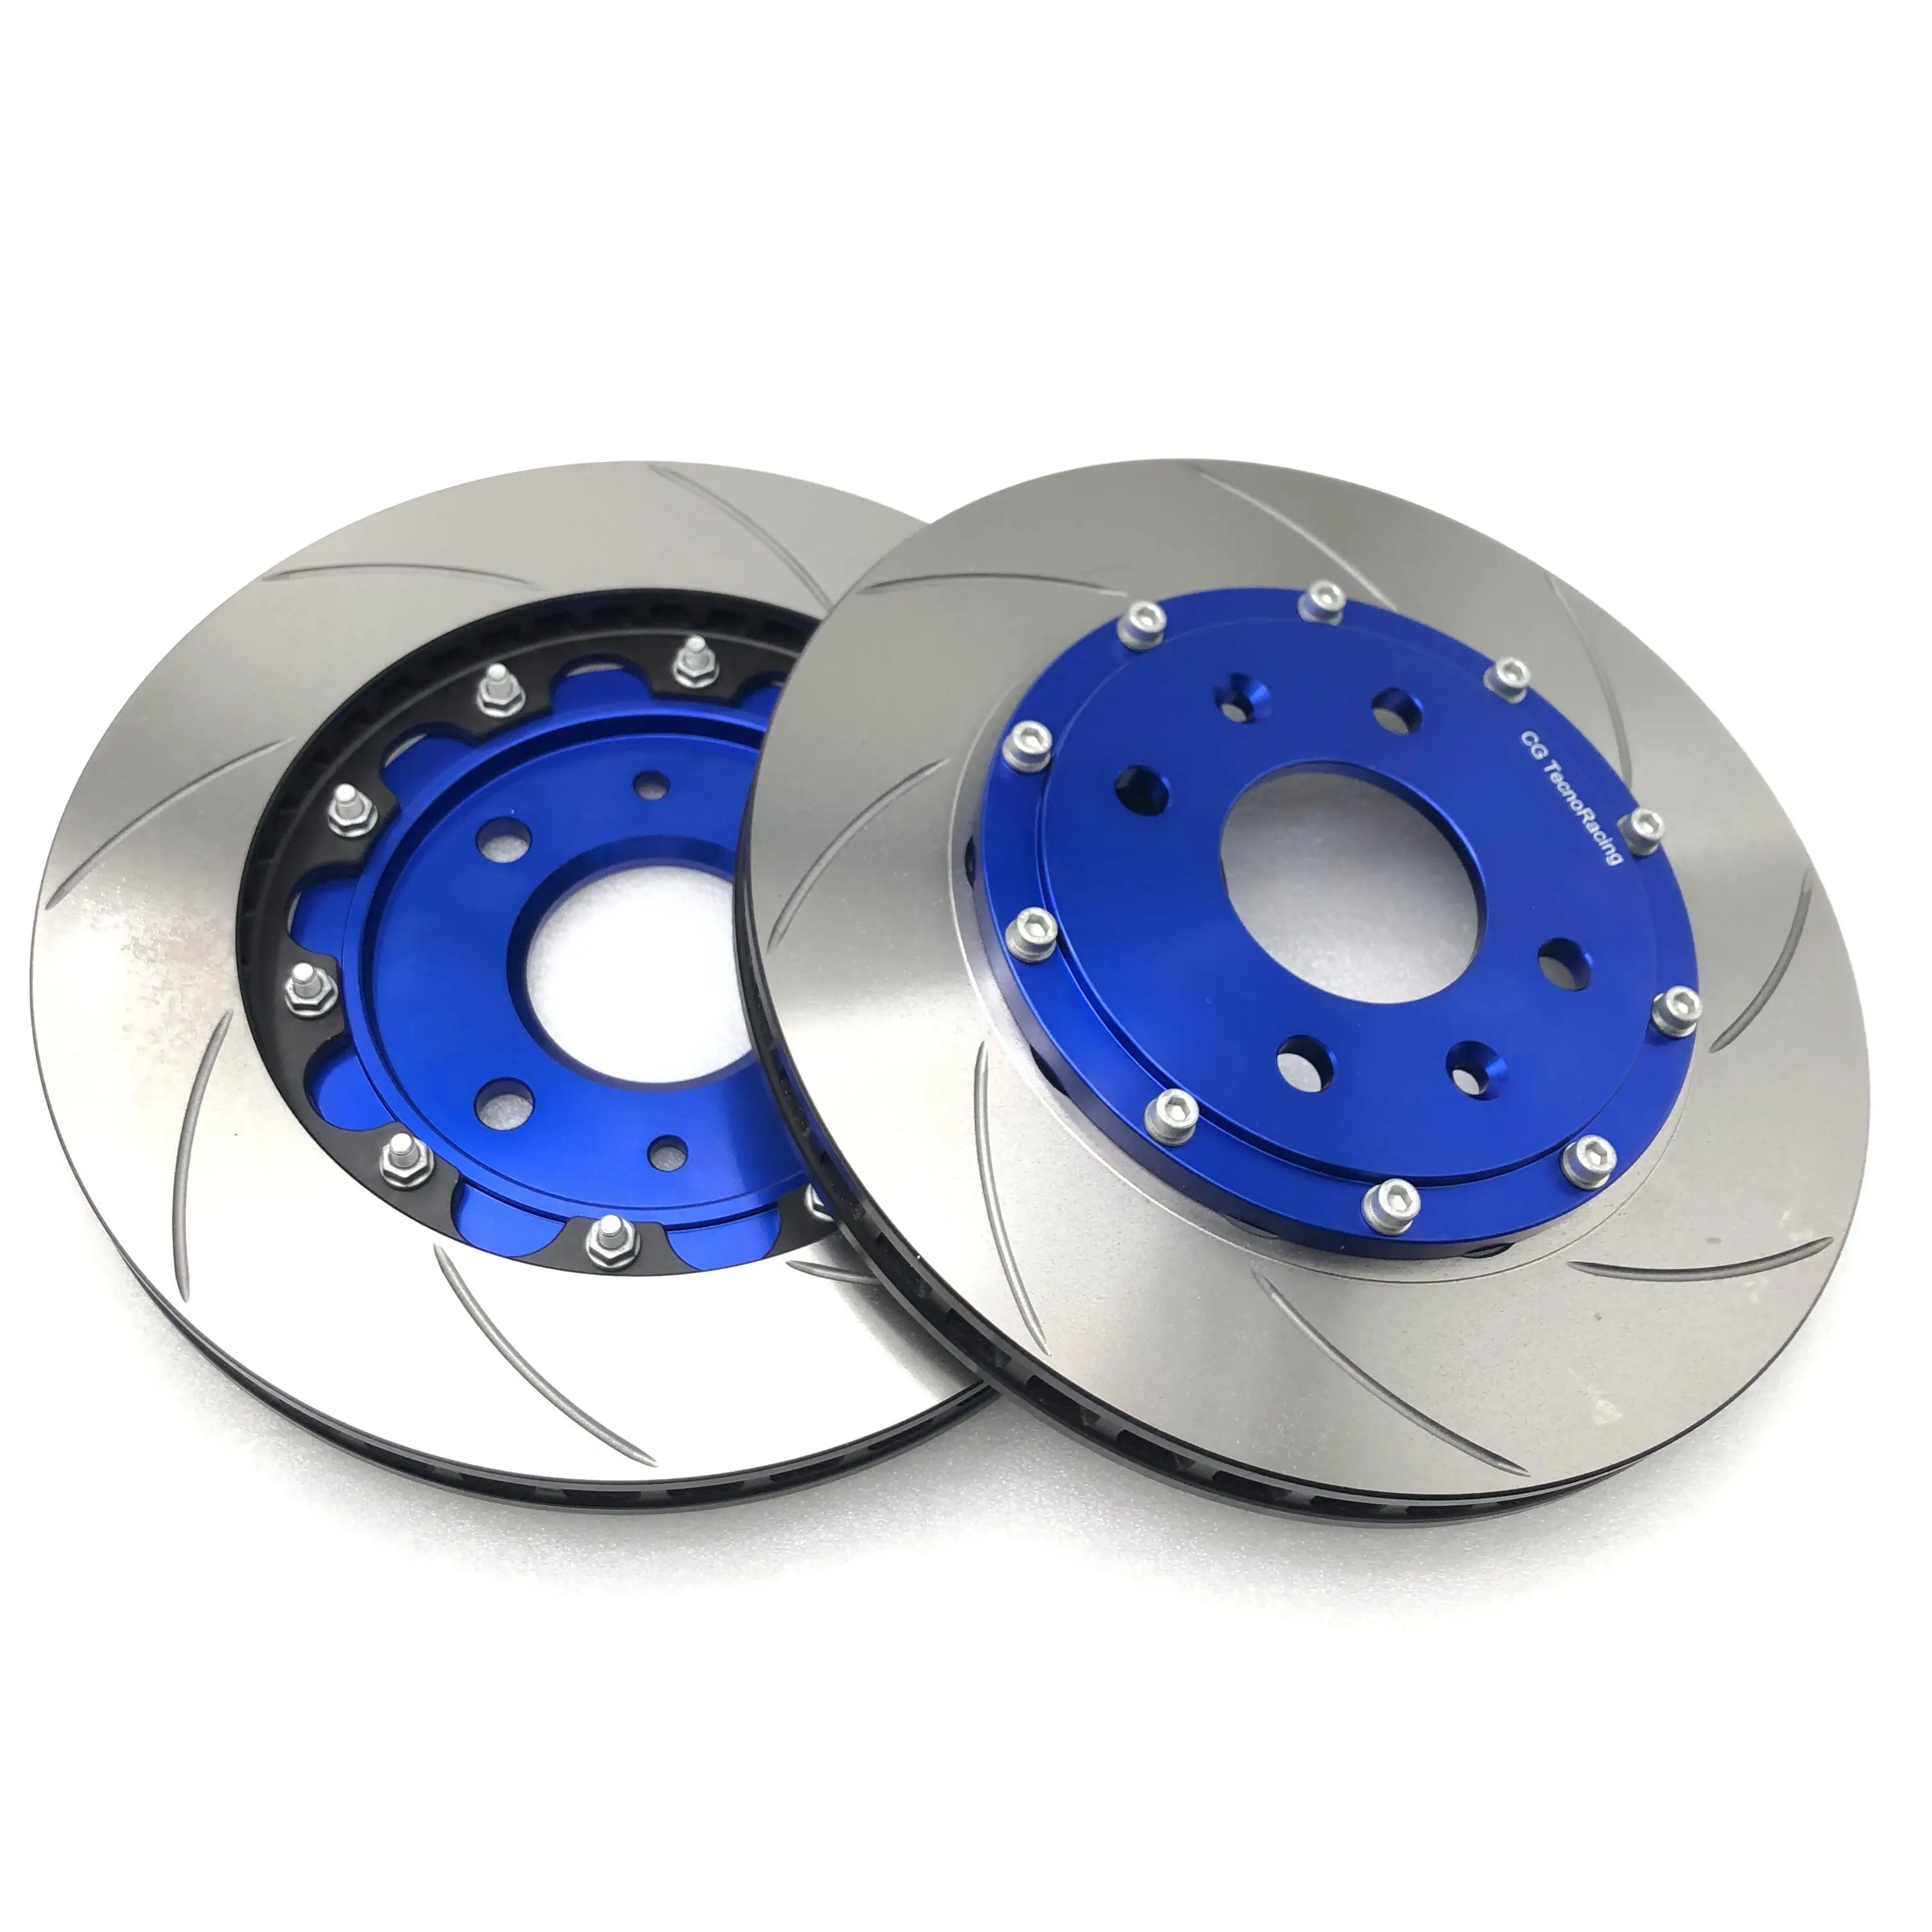 

Jekit Car brake disc 380*34mm with floating center bell for GT6 brake systems for Bmw F10 5 series 550 model front wheel